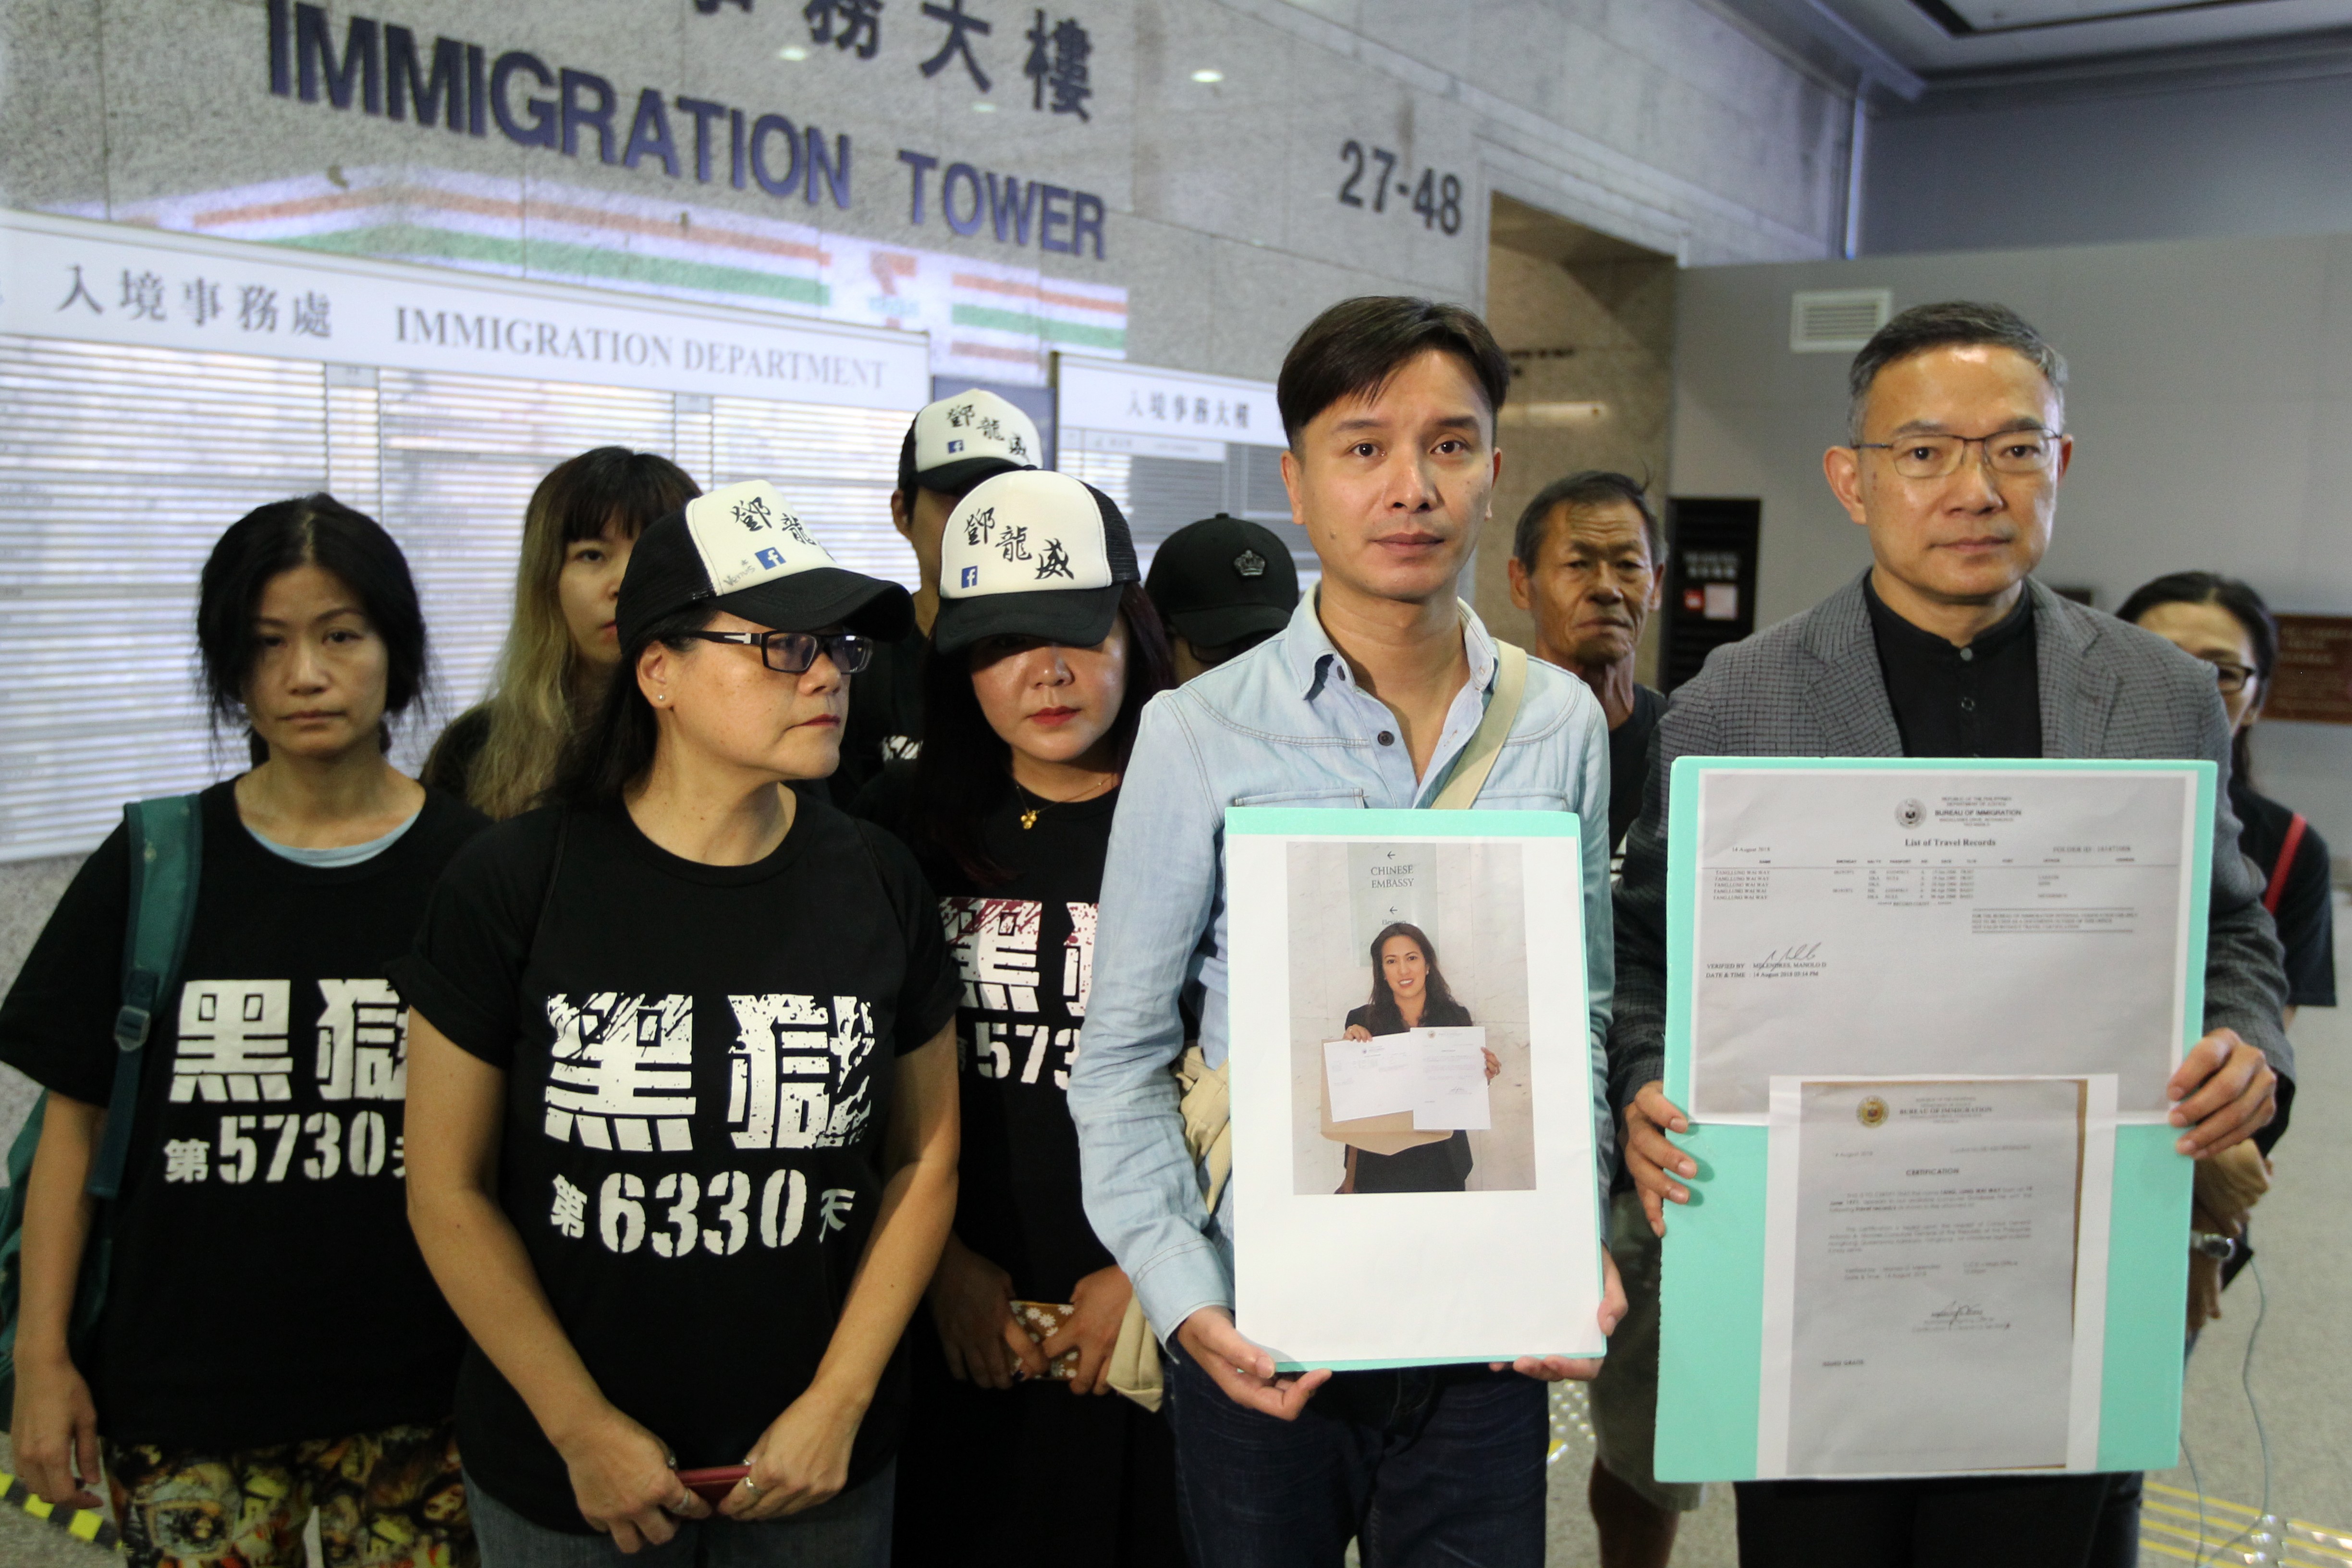 Lawmaker Paul Tse Wai-chun (right) and Billy Tang Lung-piu (centre), brother of jailed Tang Lung-wai, meet the media at Immigration Tower in Wan Chai. Photo: Roy Issa